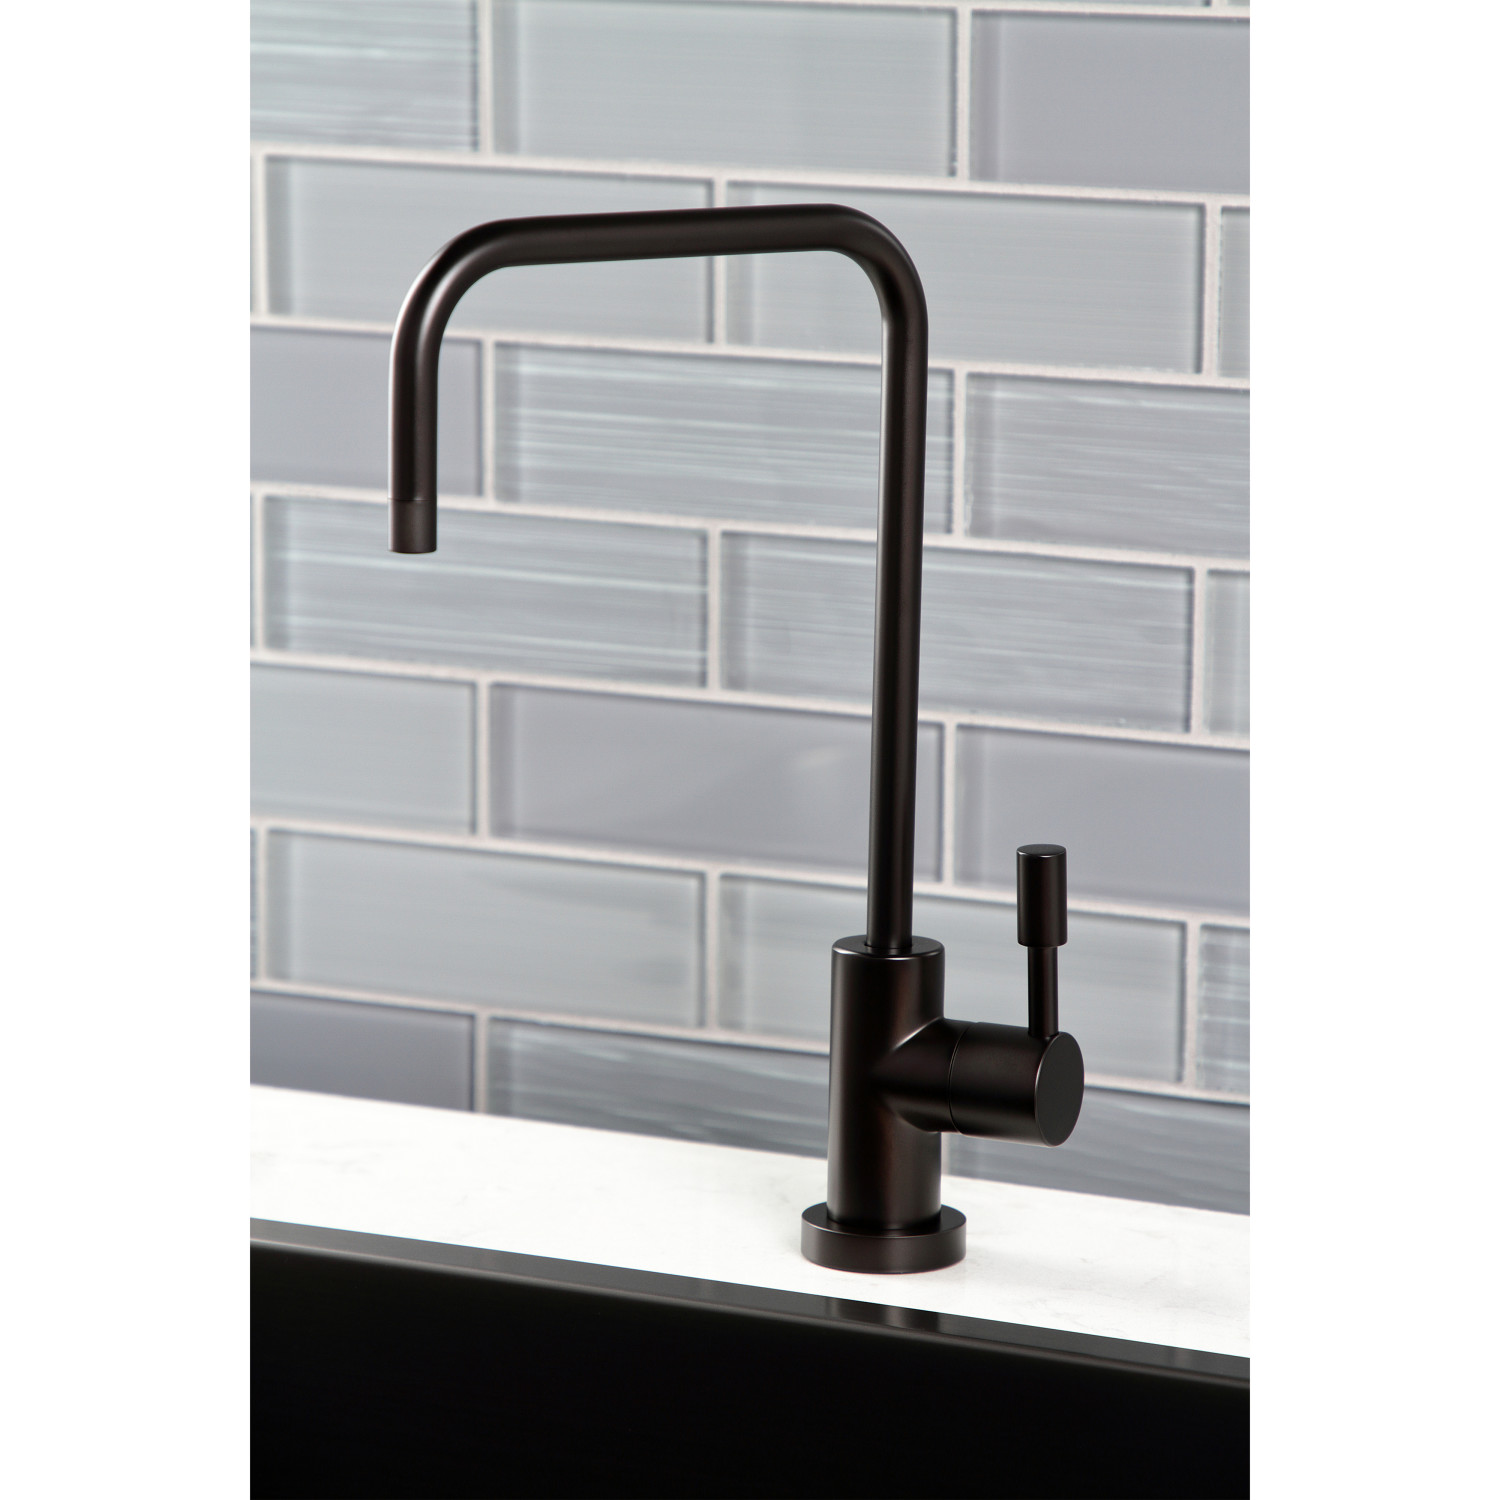 Kingston Brass KS6195DL Concord Single-Handle Water Filtration Faucet, Oil Rubbed Bronze - image 2 of 5